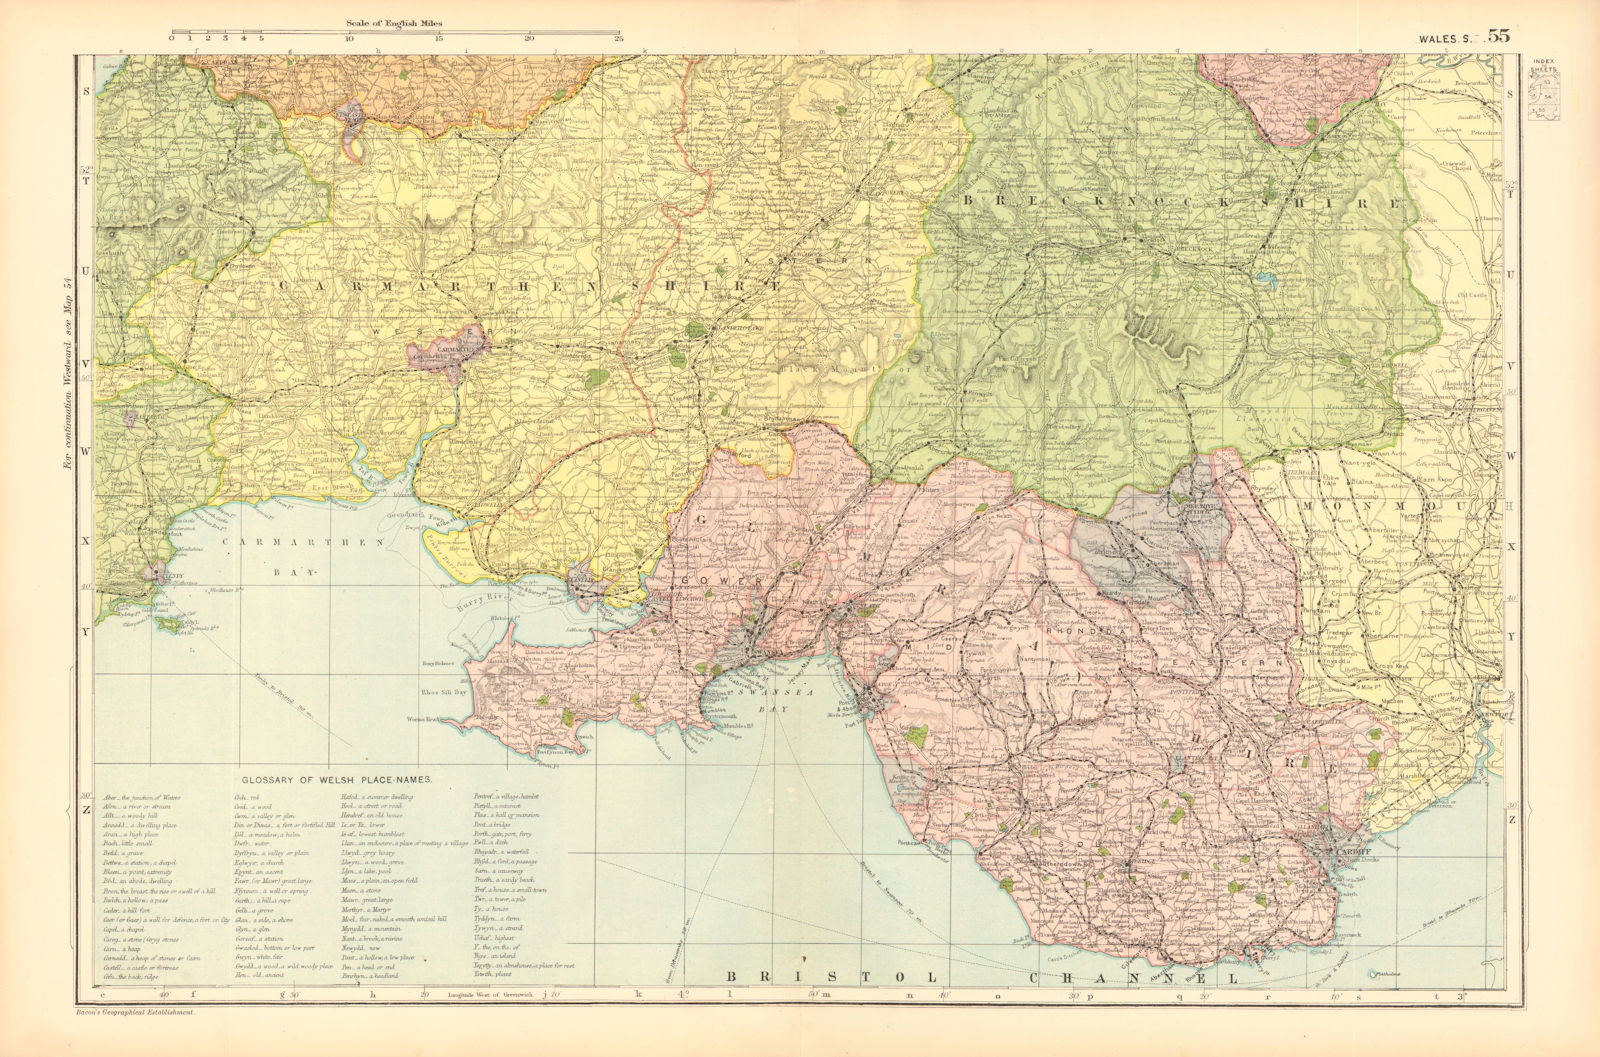 SOUTH WALES. Parliamentary divisions. Welsh place name Glossary. BACON 1904 map